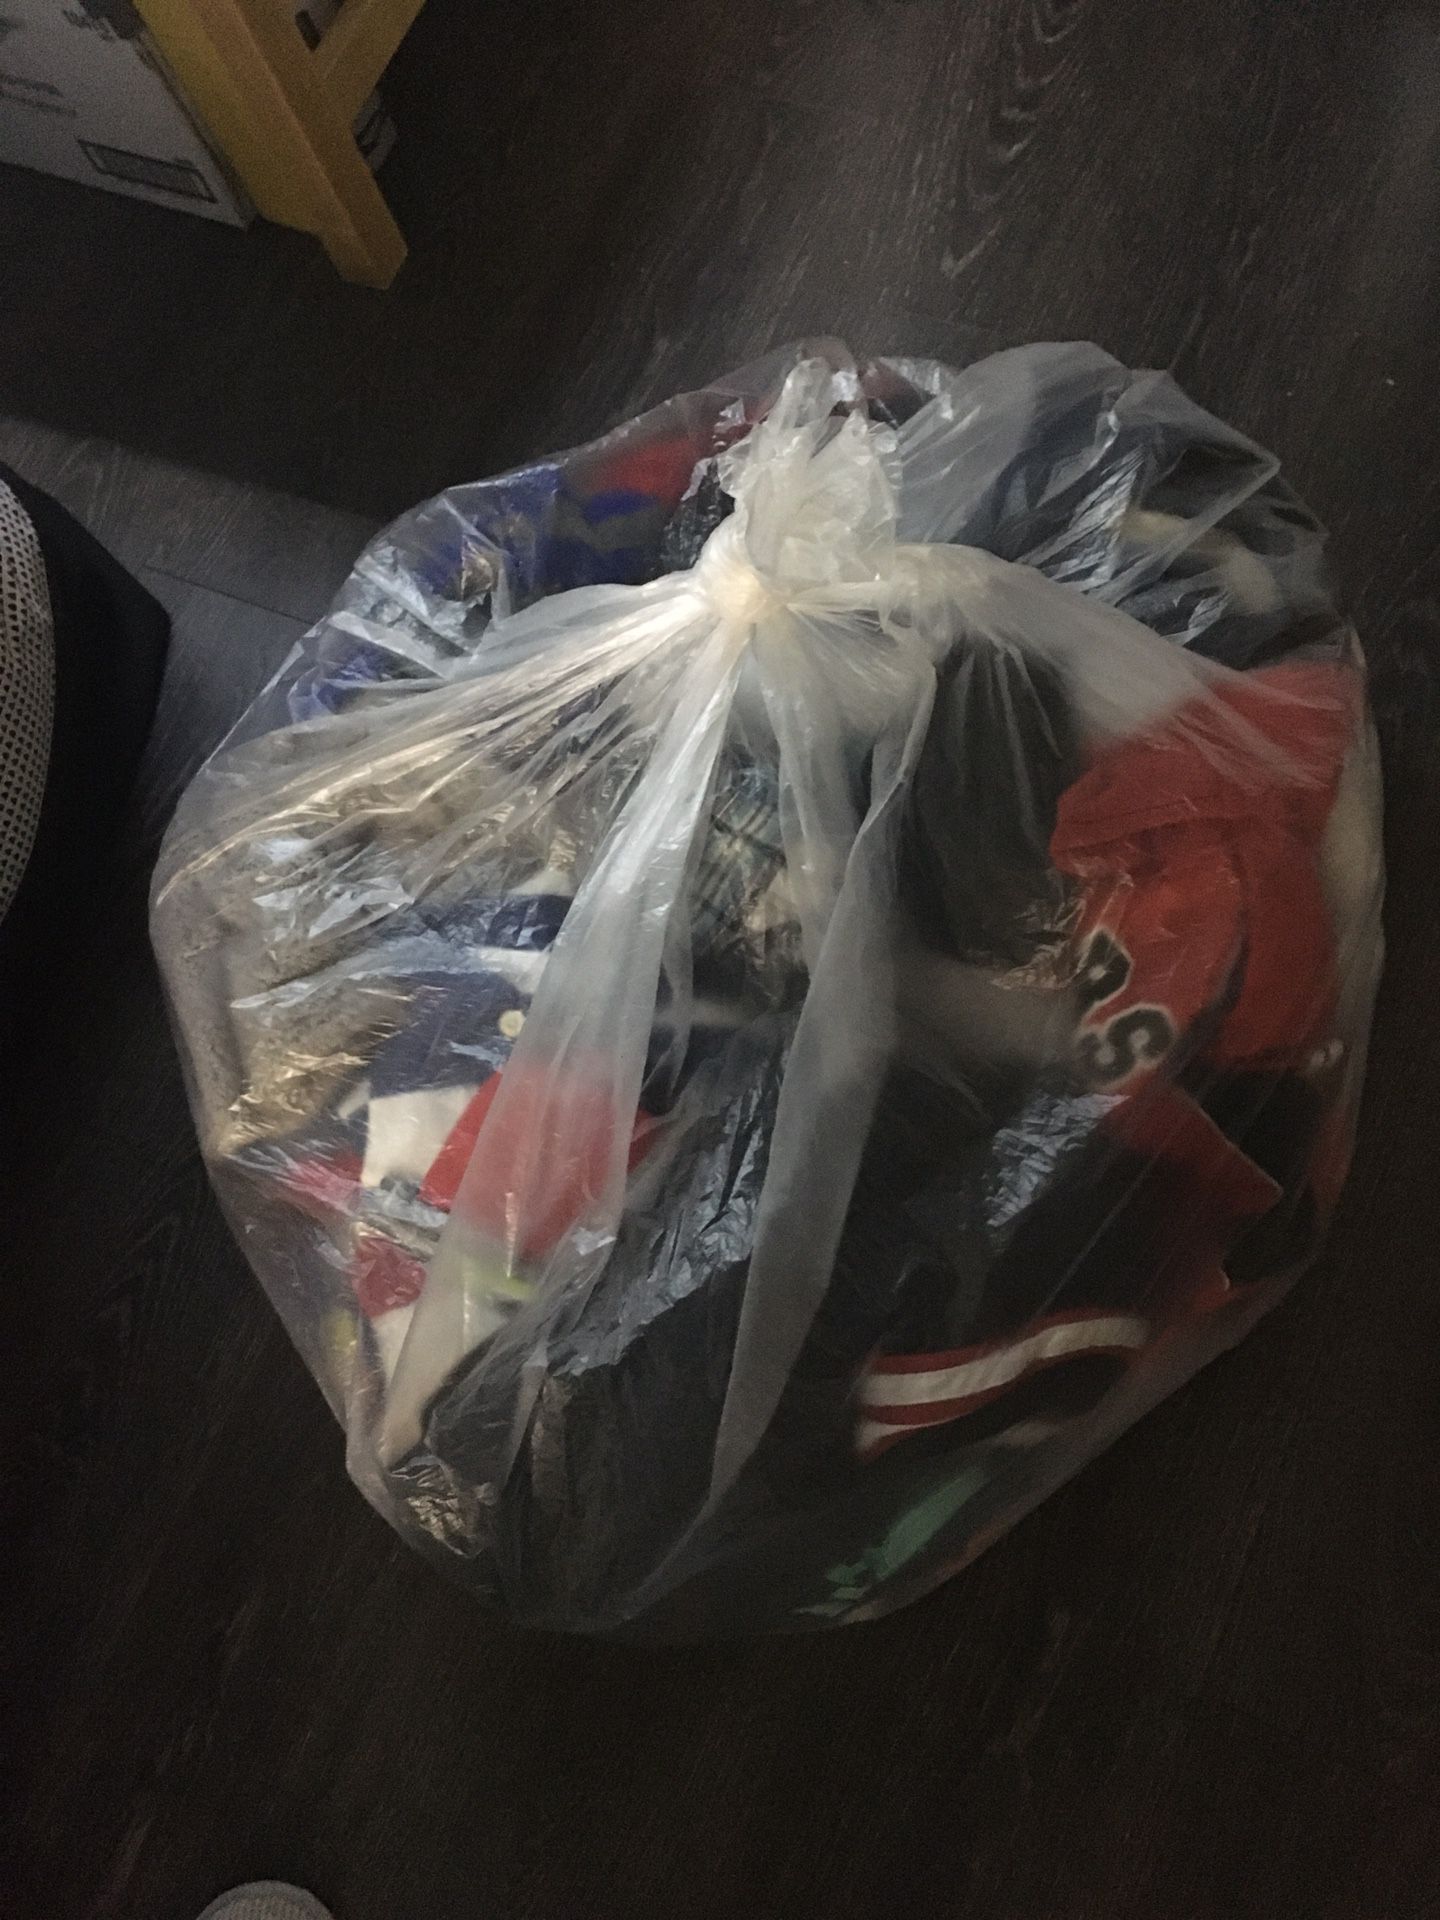 Free baby/toddler clothes